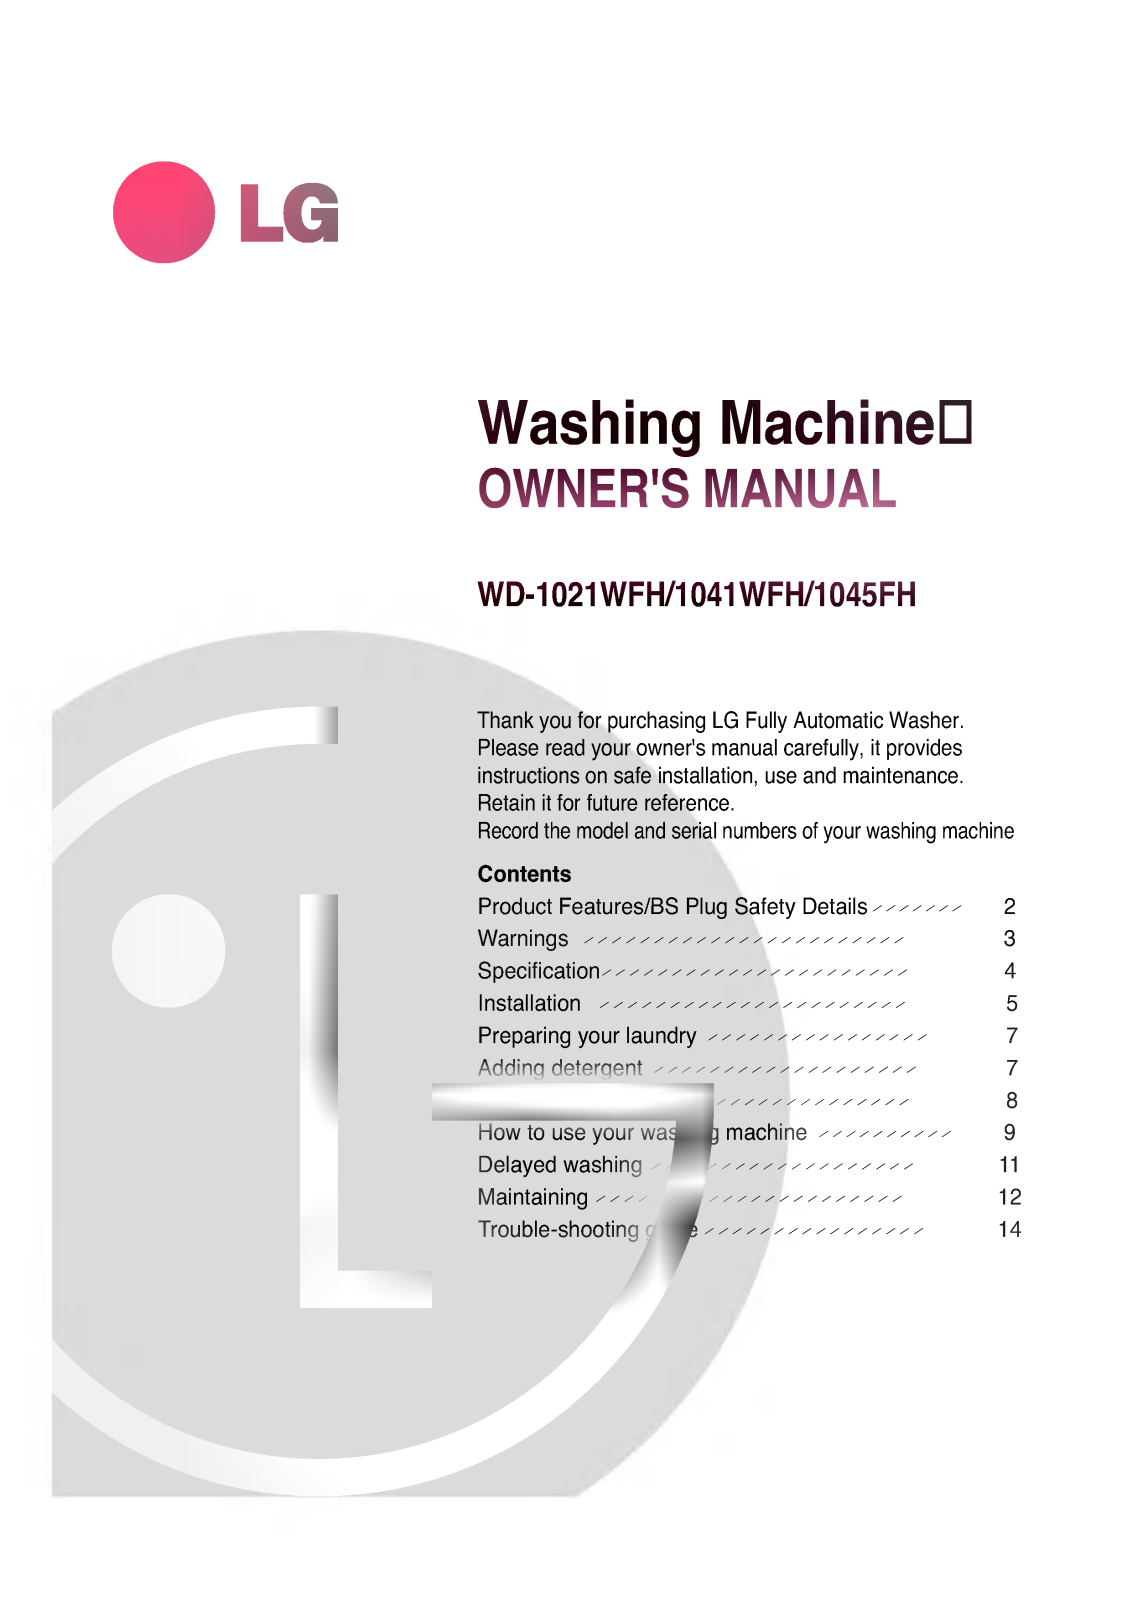 LG WD-1045FH Owner’s Manual